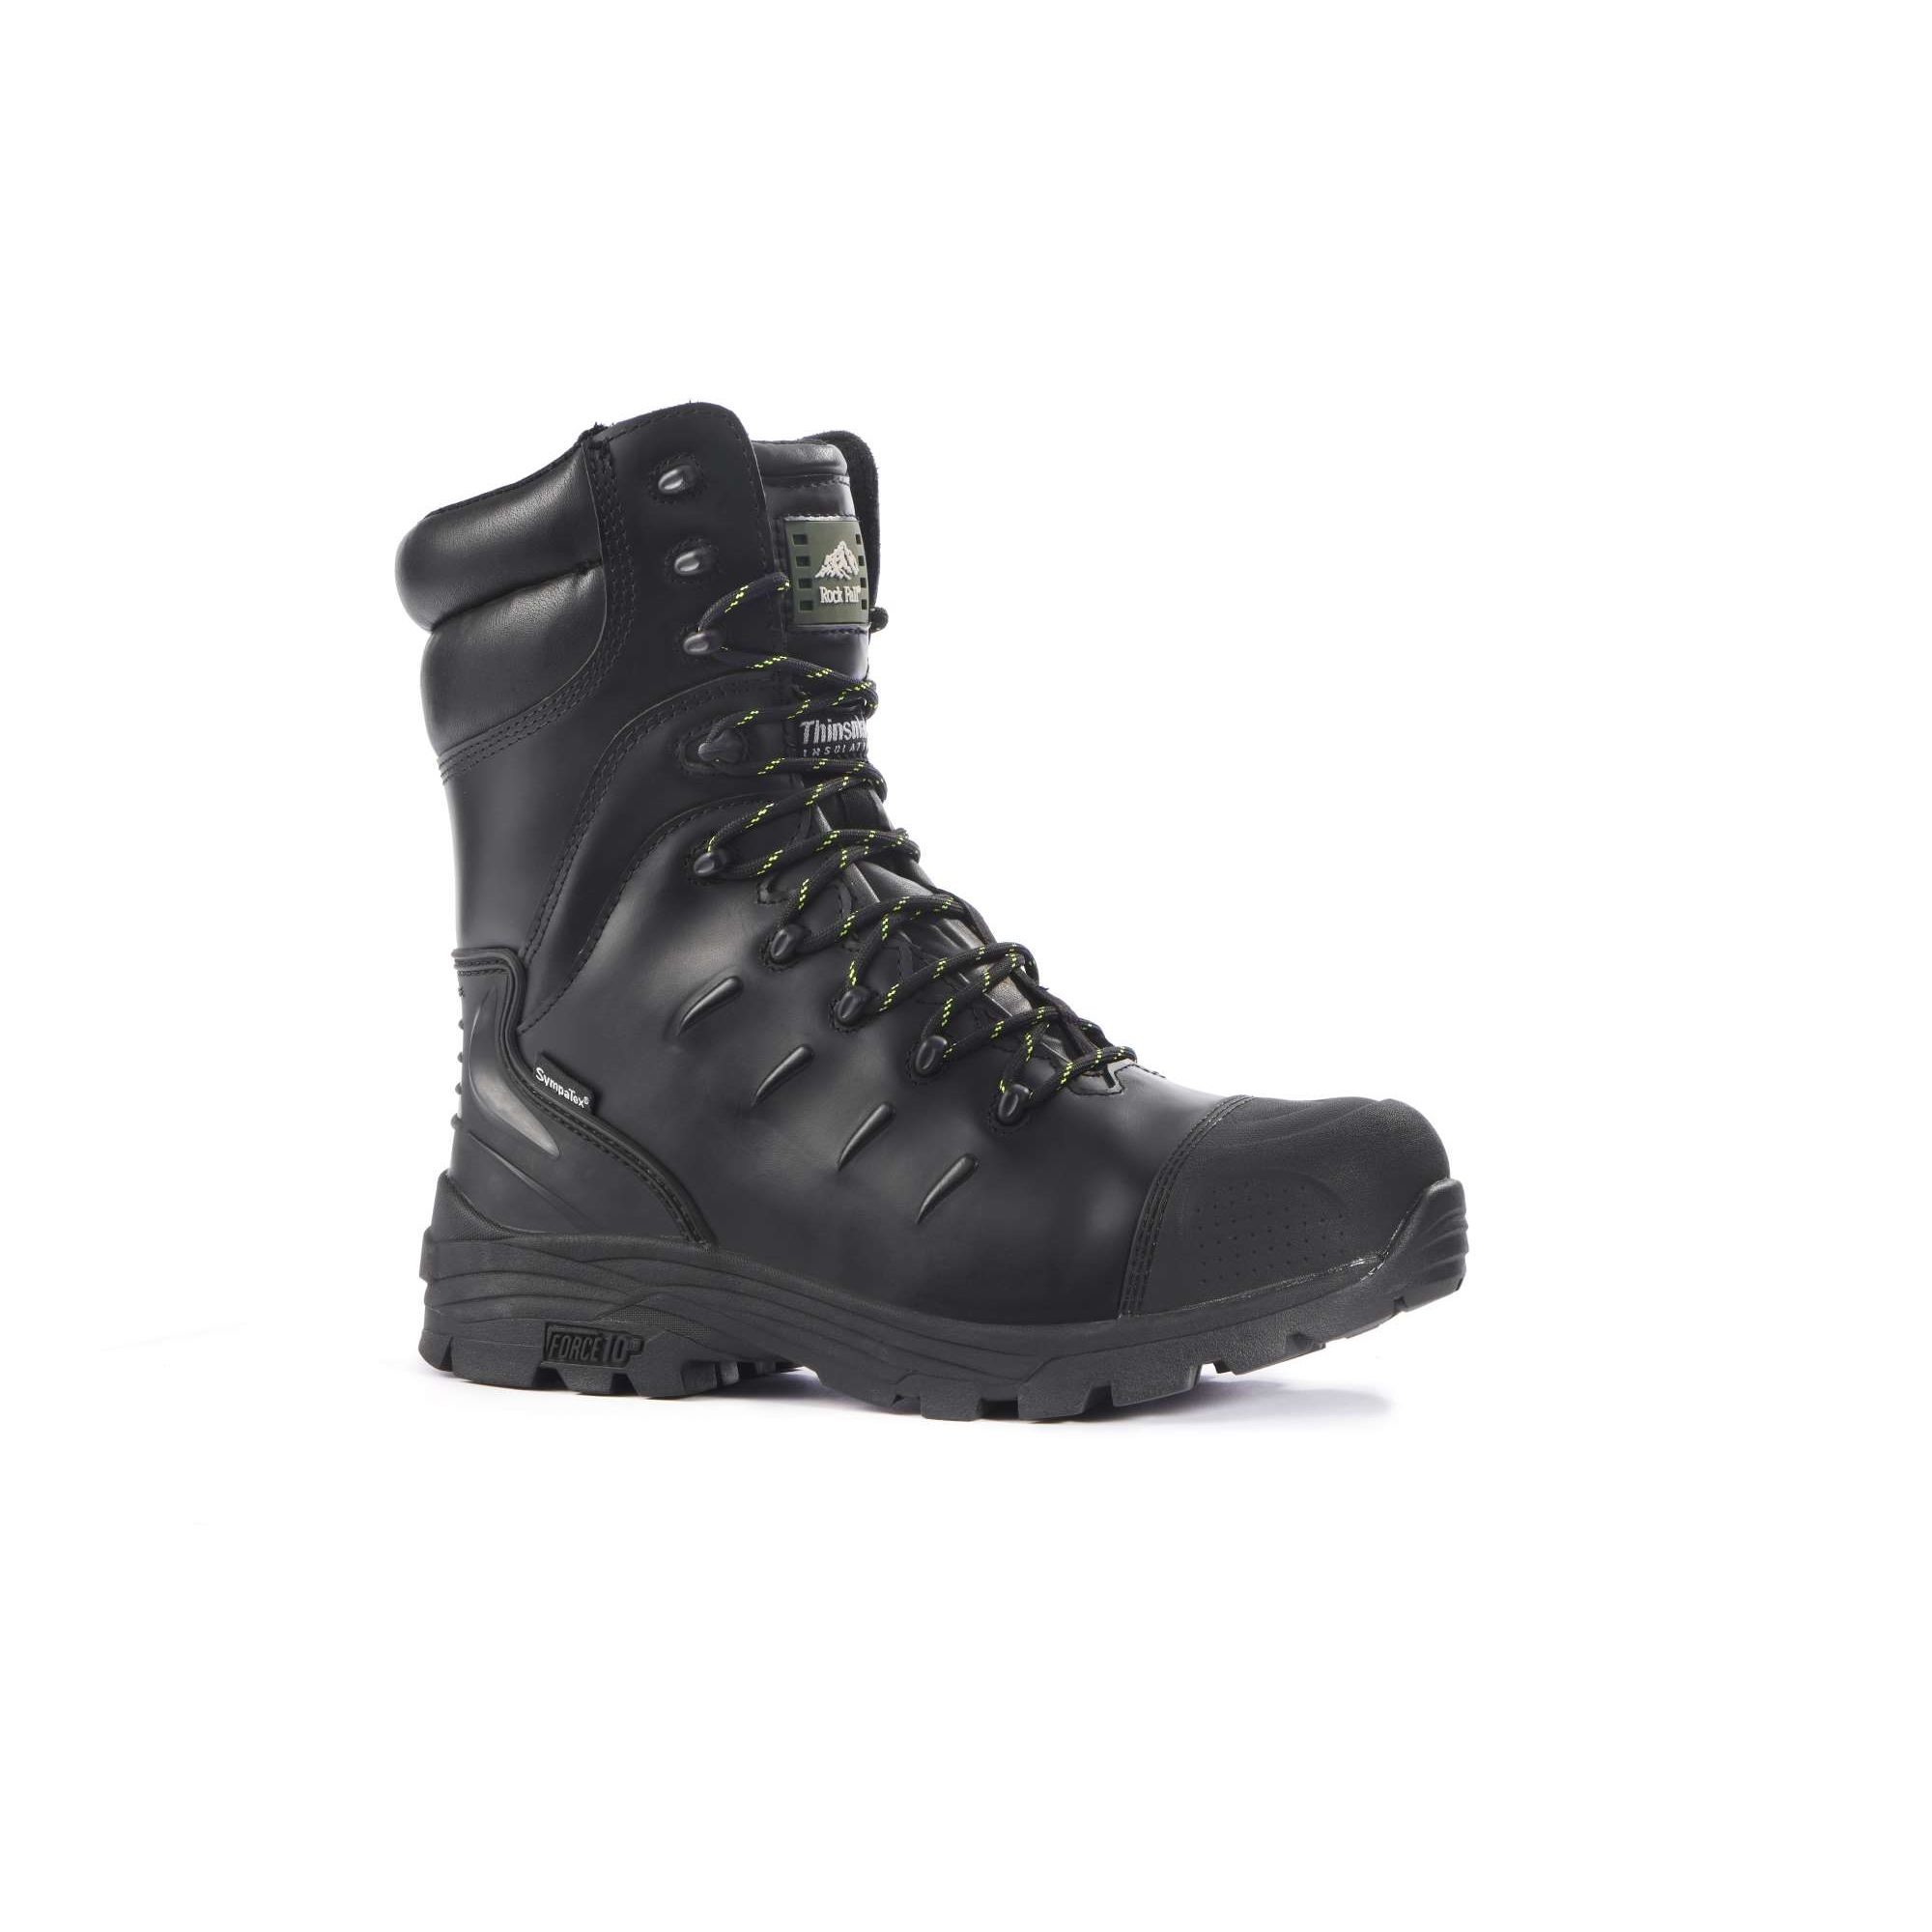 Rock Fall Monzonite Leather S3 Safety Boots